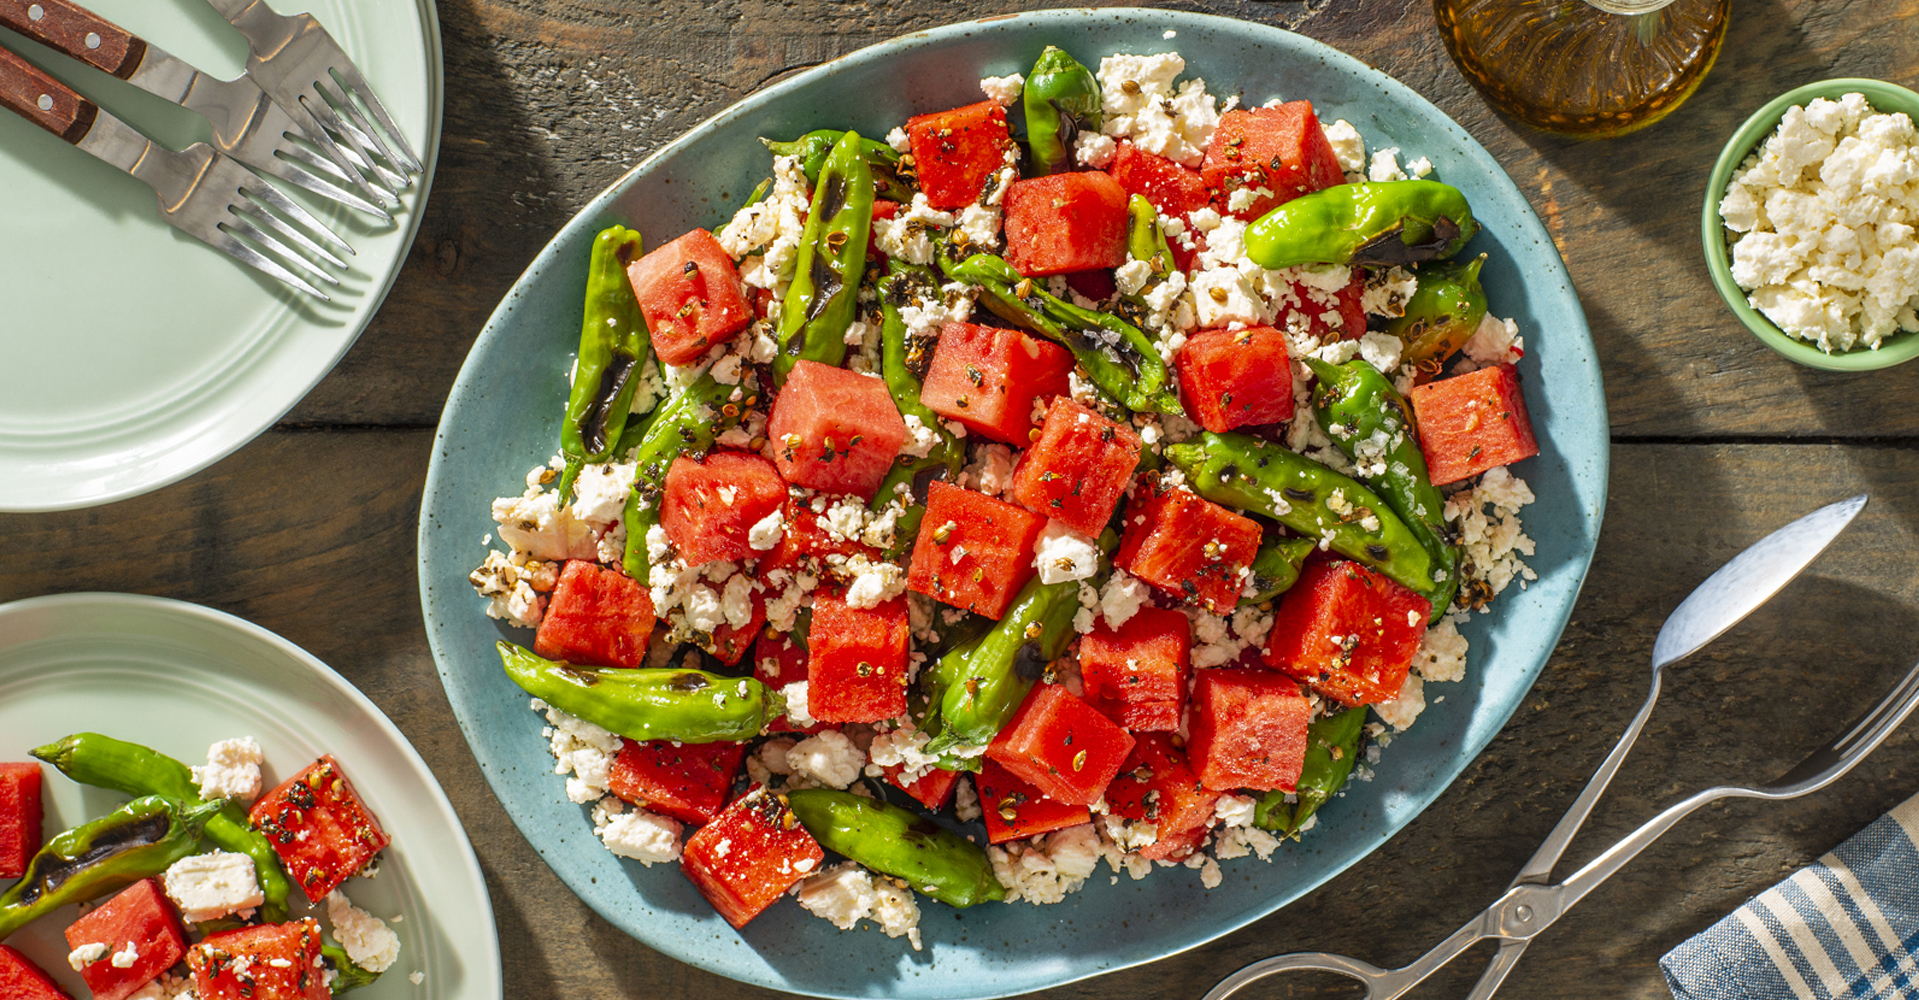 Grilled Shishito and Watermelon Salad with Crumbled Ontario Feta